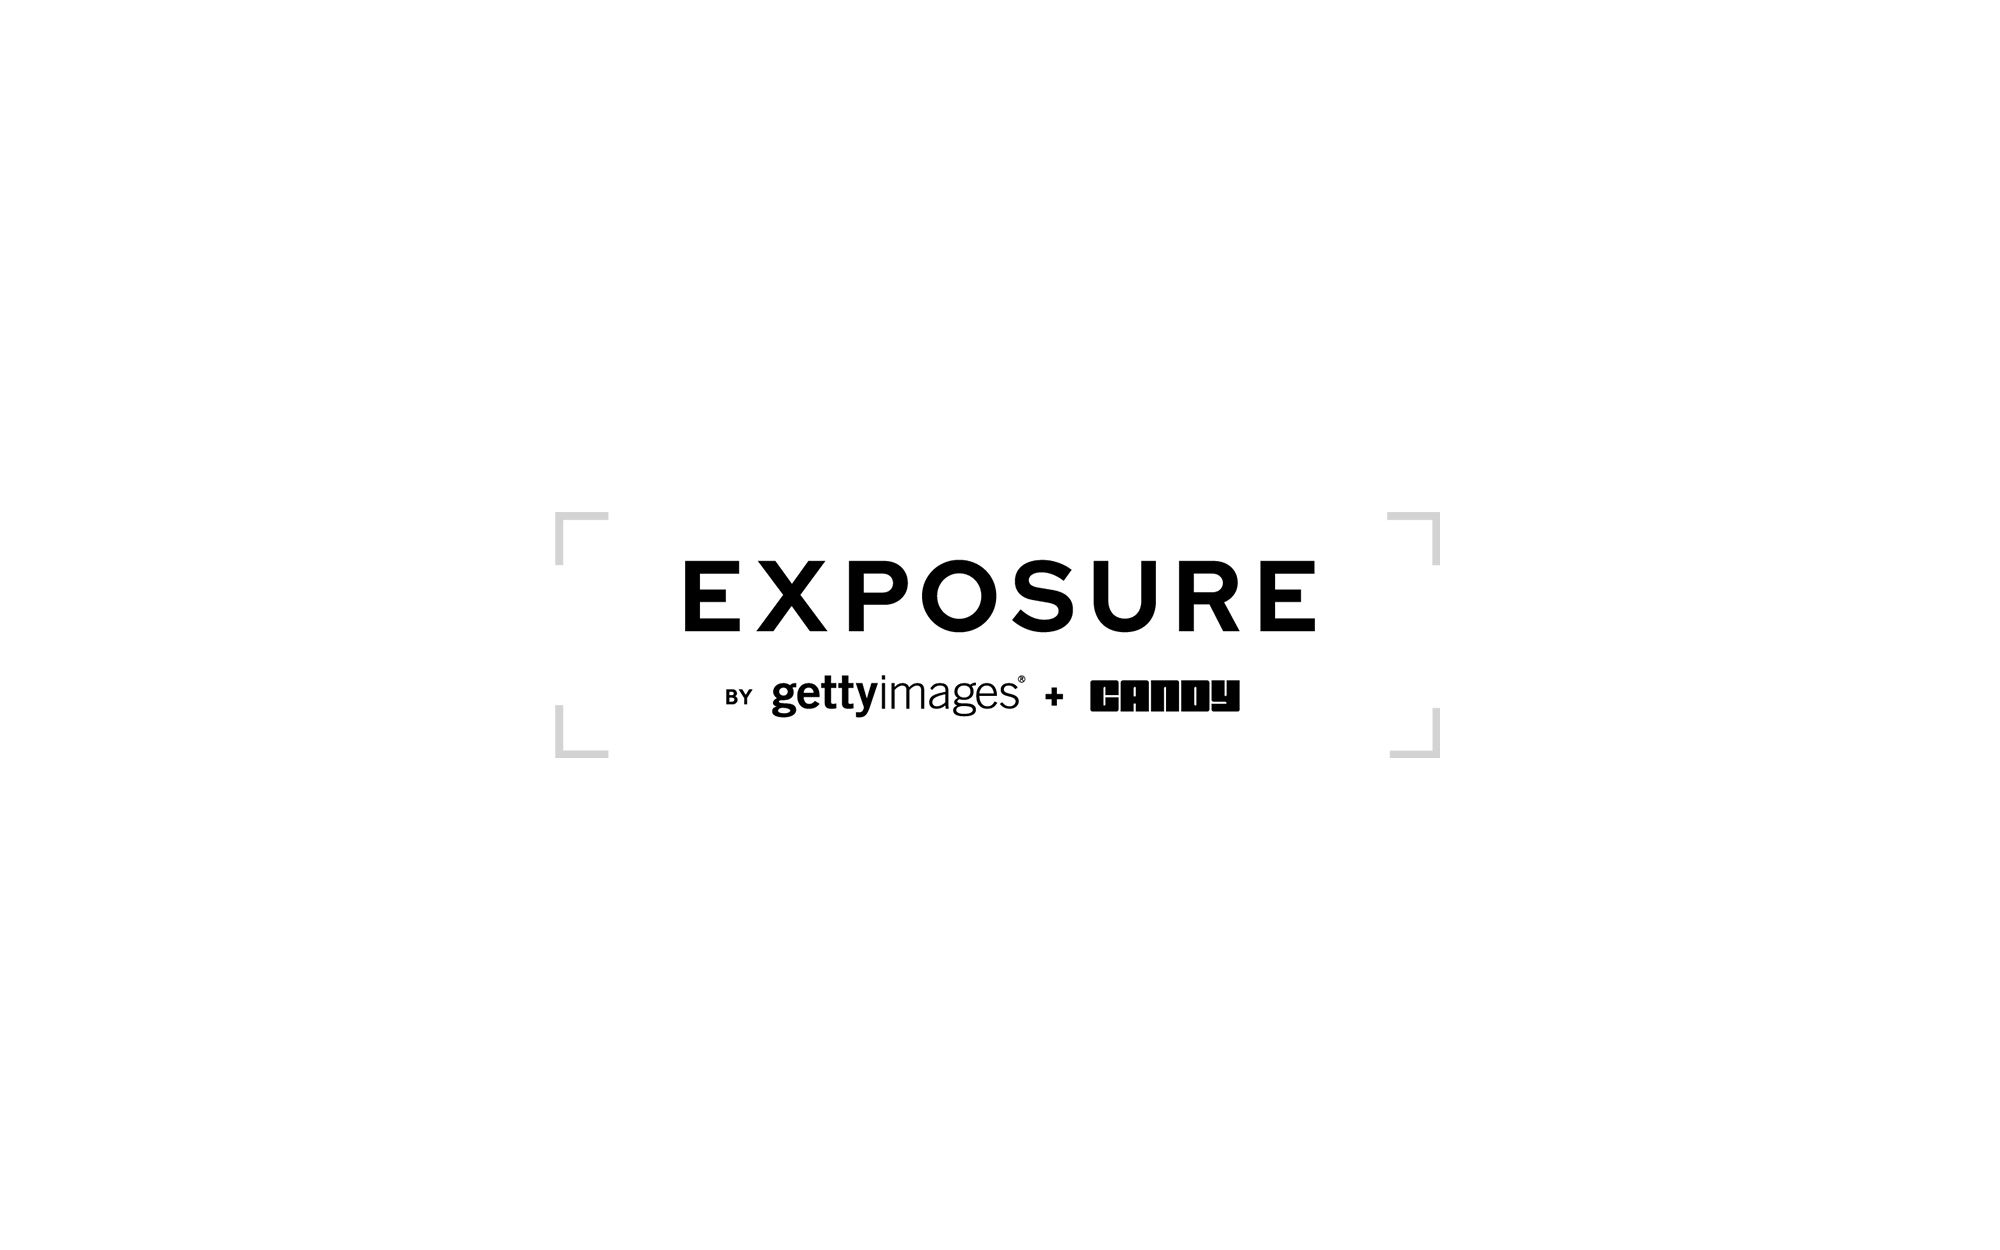 Introducing “Exposure: by Getty Images & Candy”